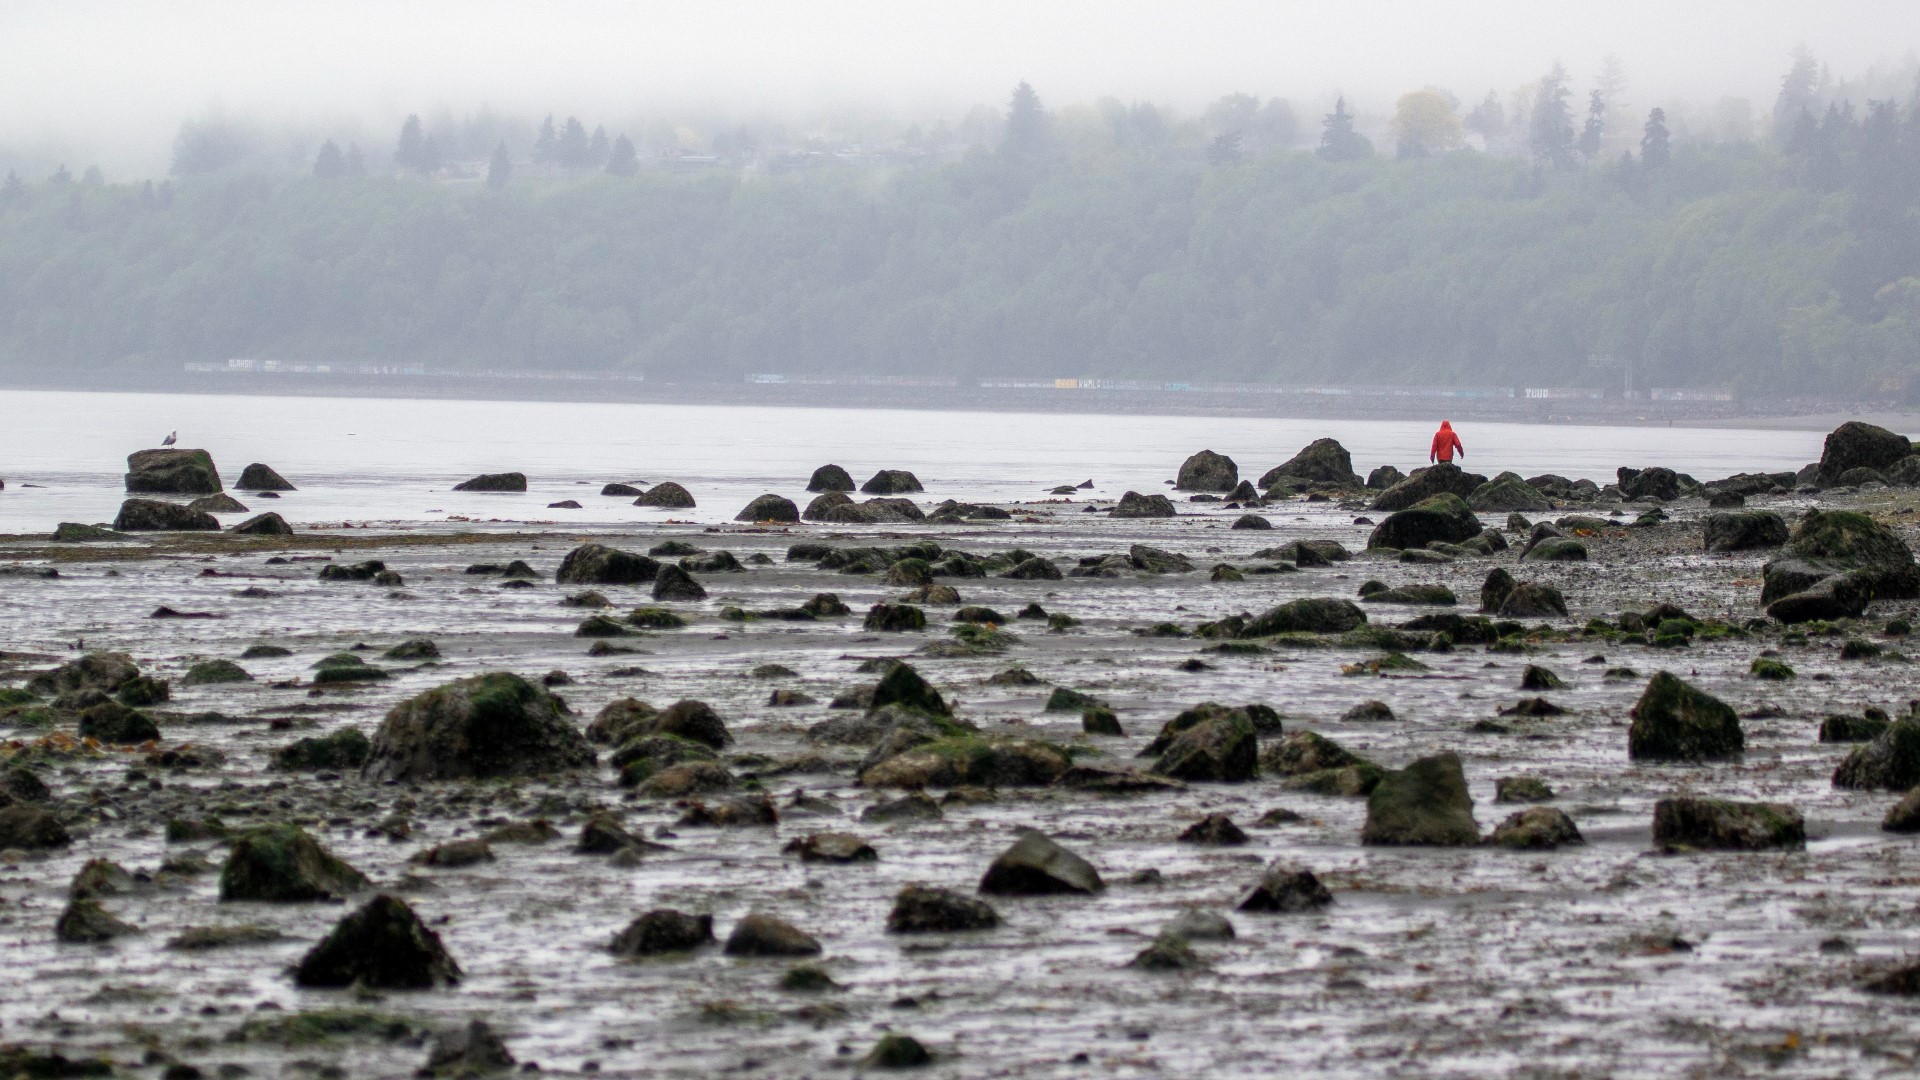 Meteorologist Christopher Nunley explains why western Washington is experiencing very low tides this week.